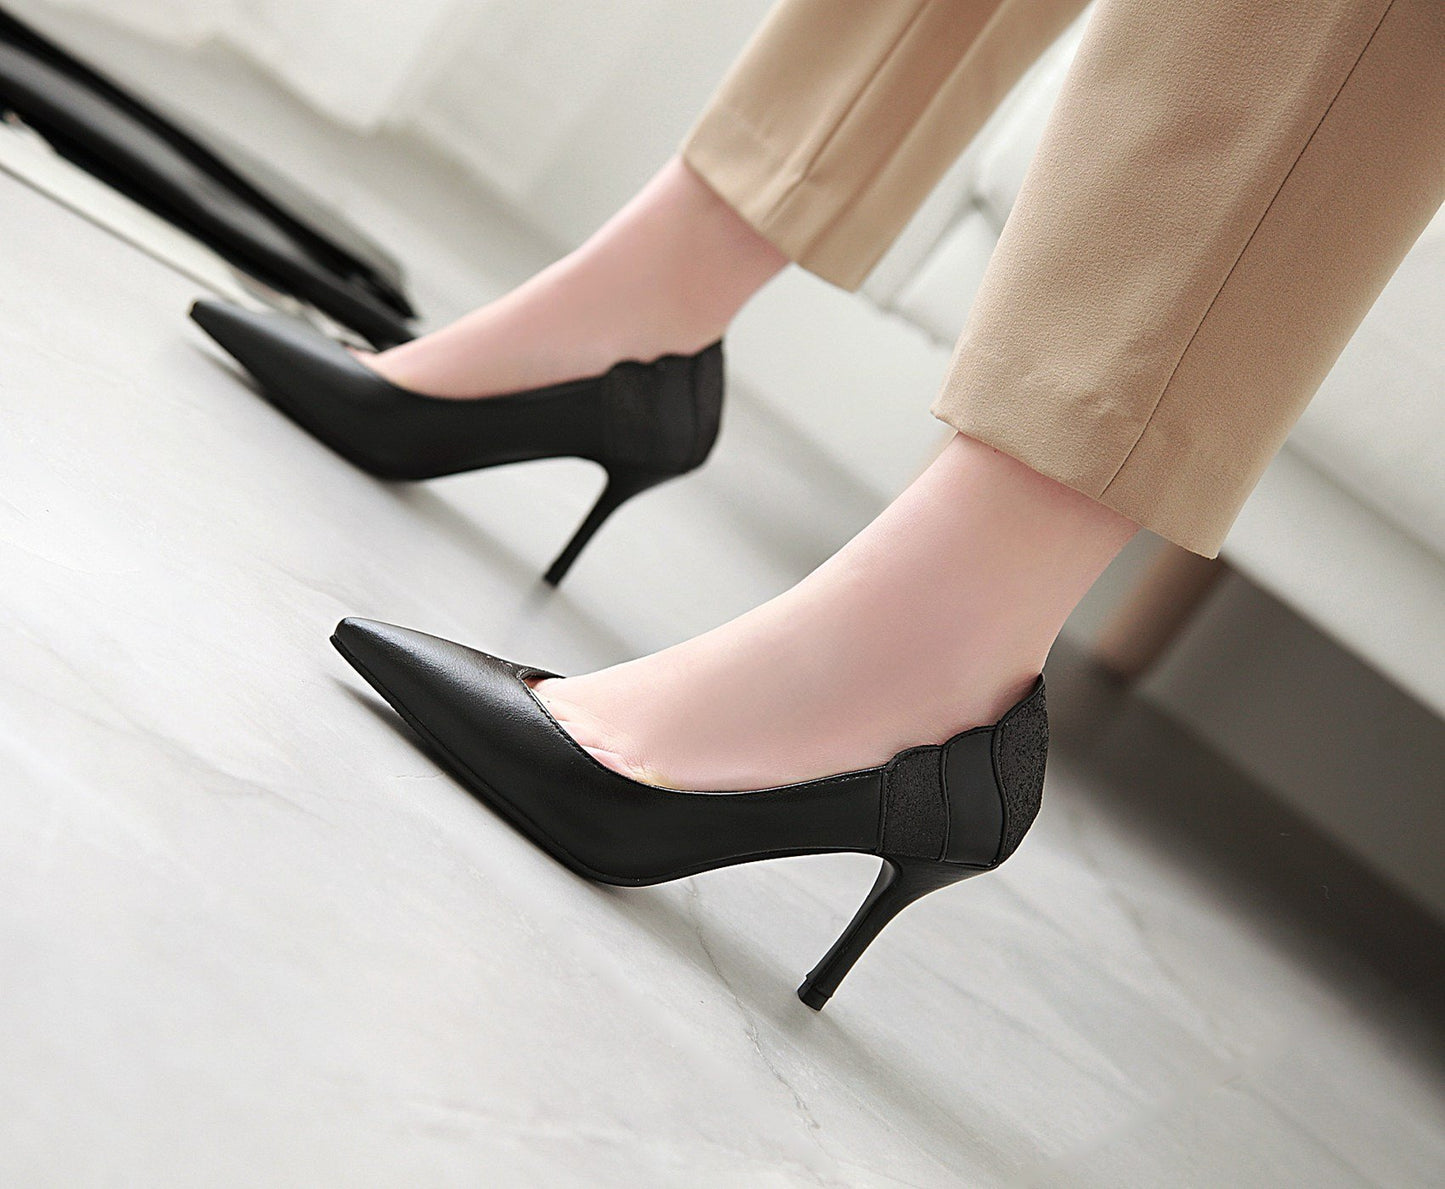 Lady Woman's Shoes High-heeled Shallow Super-fibre Pointed Toe Pumps